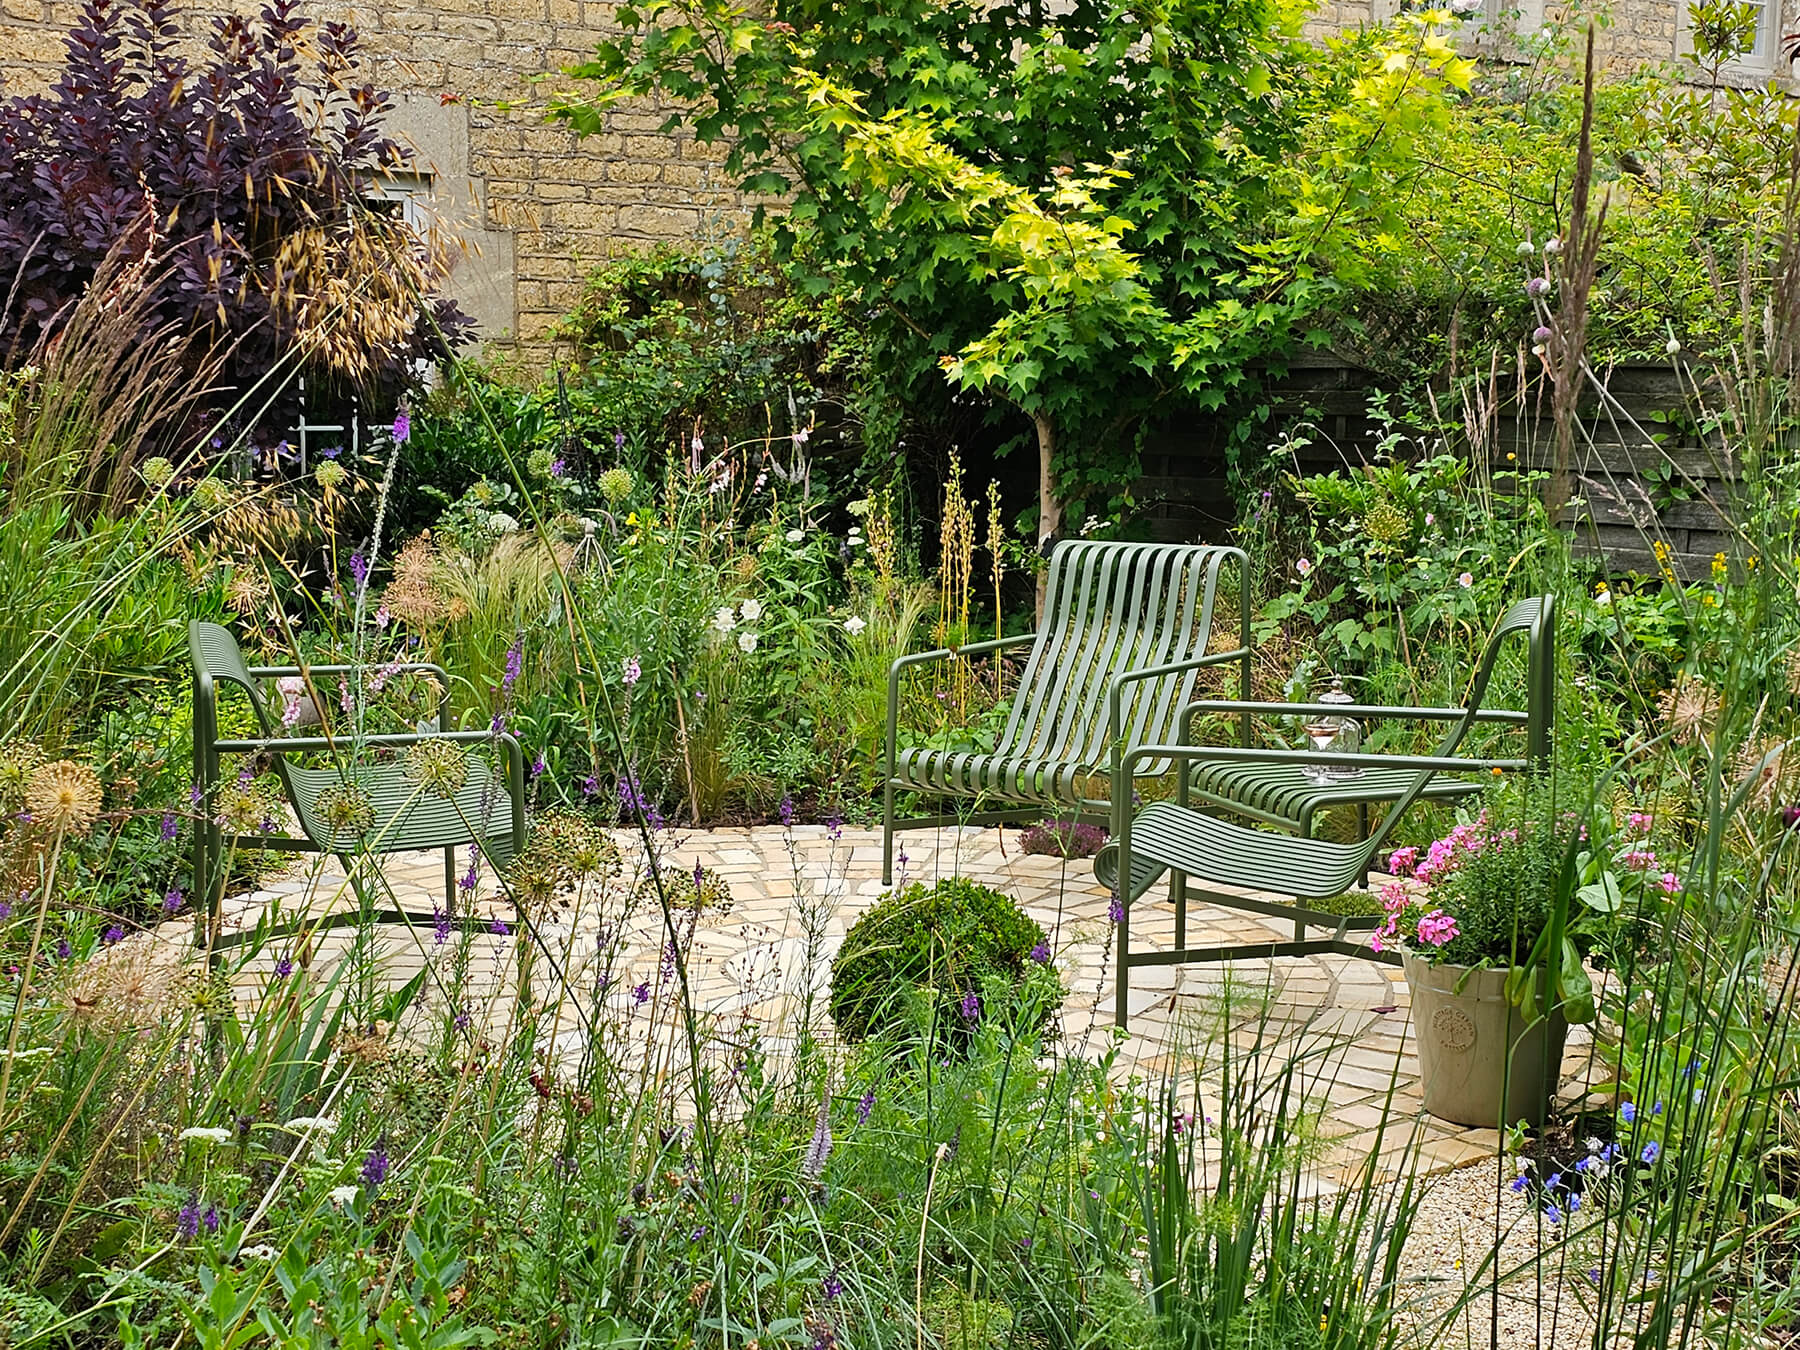 The No Lawn Front Garden, designed by April House – Award Winning Cotswolds Garden Design